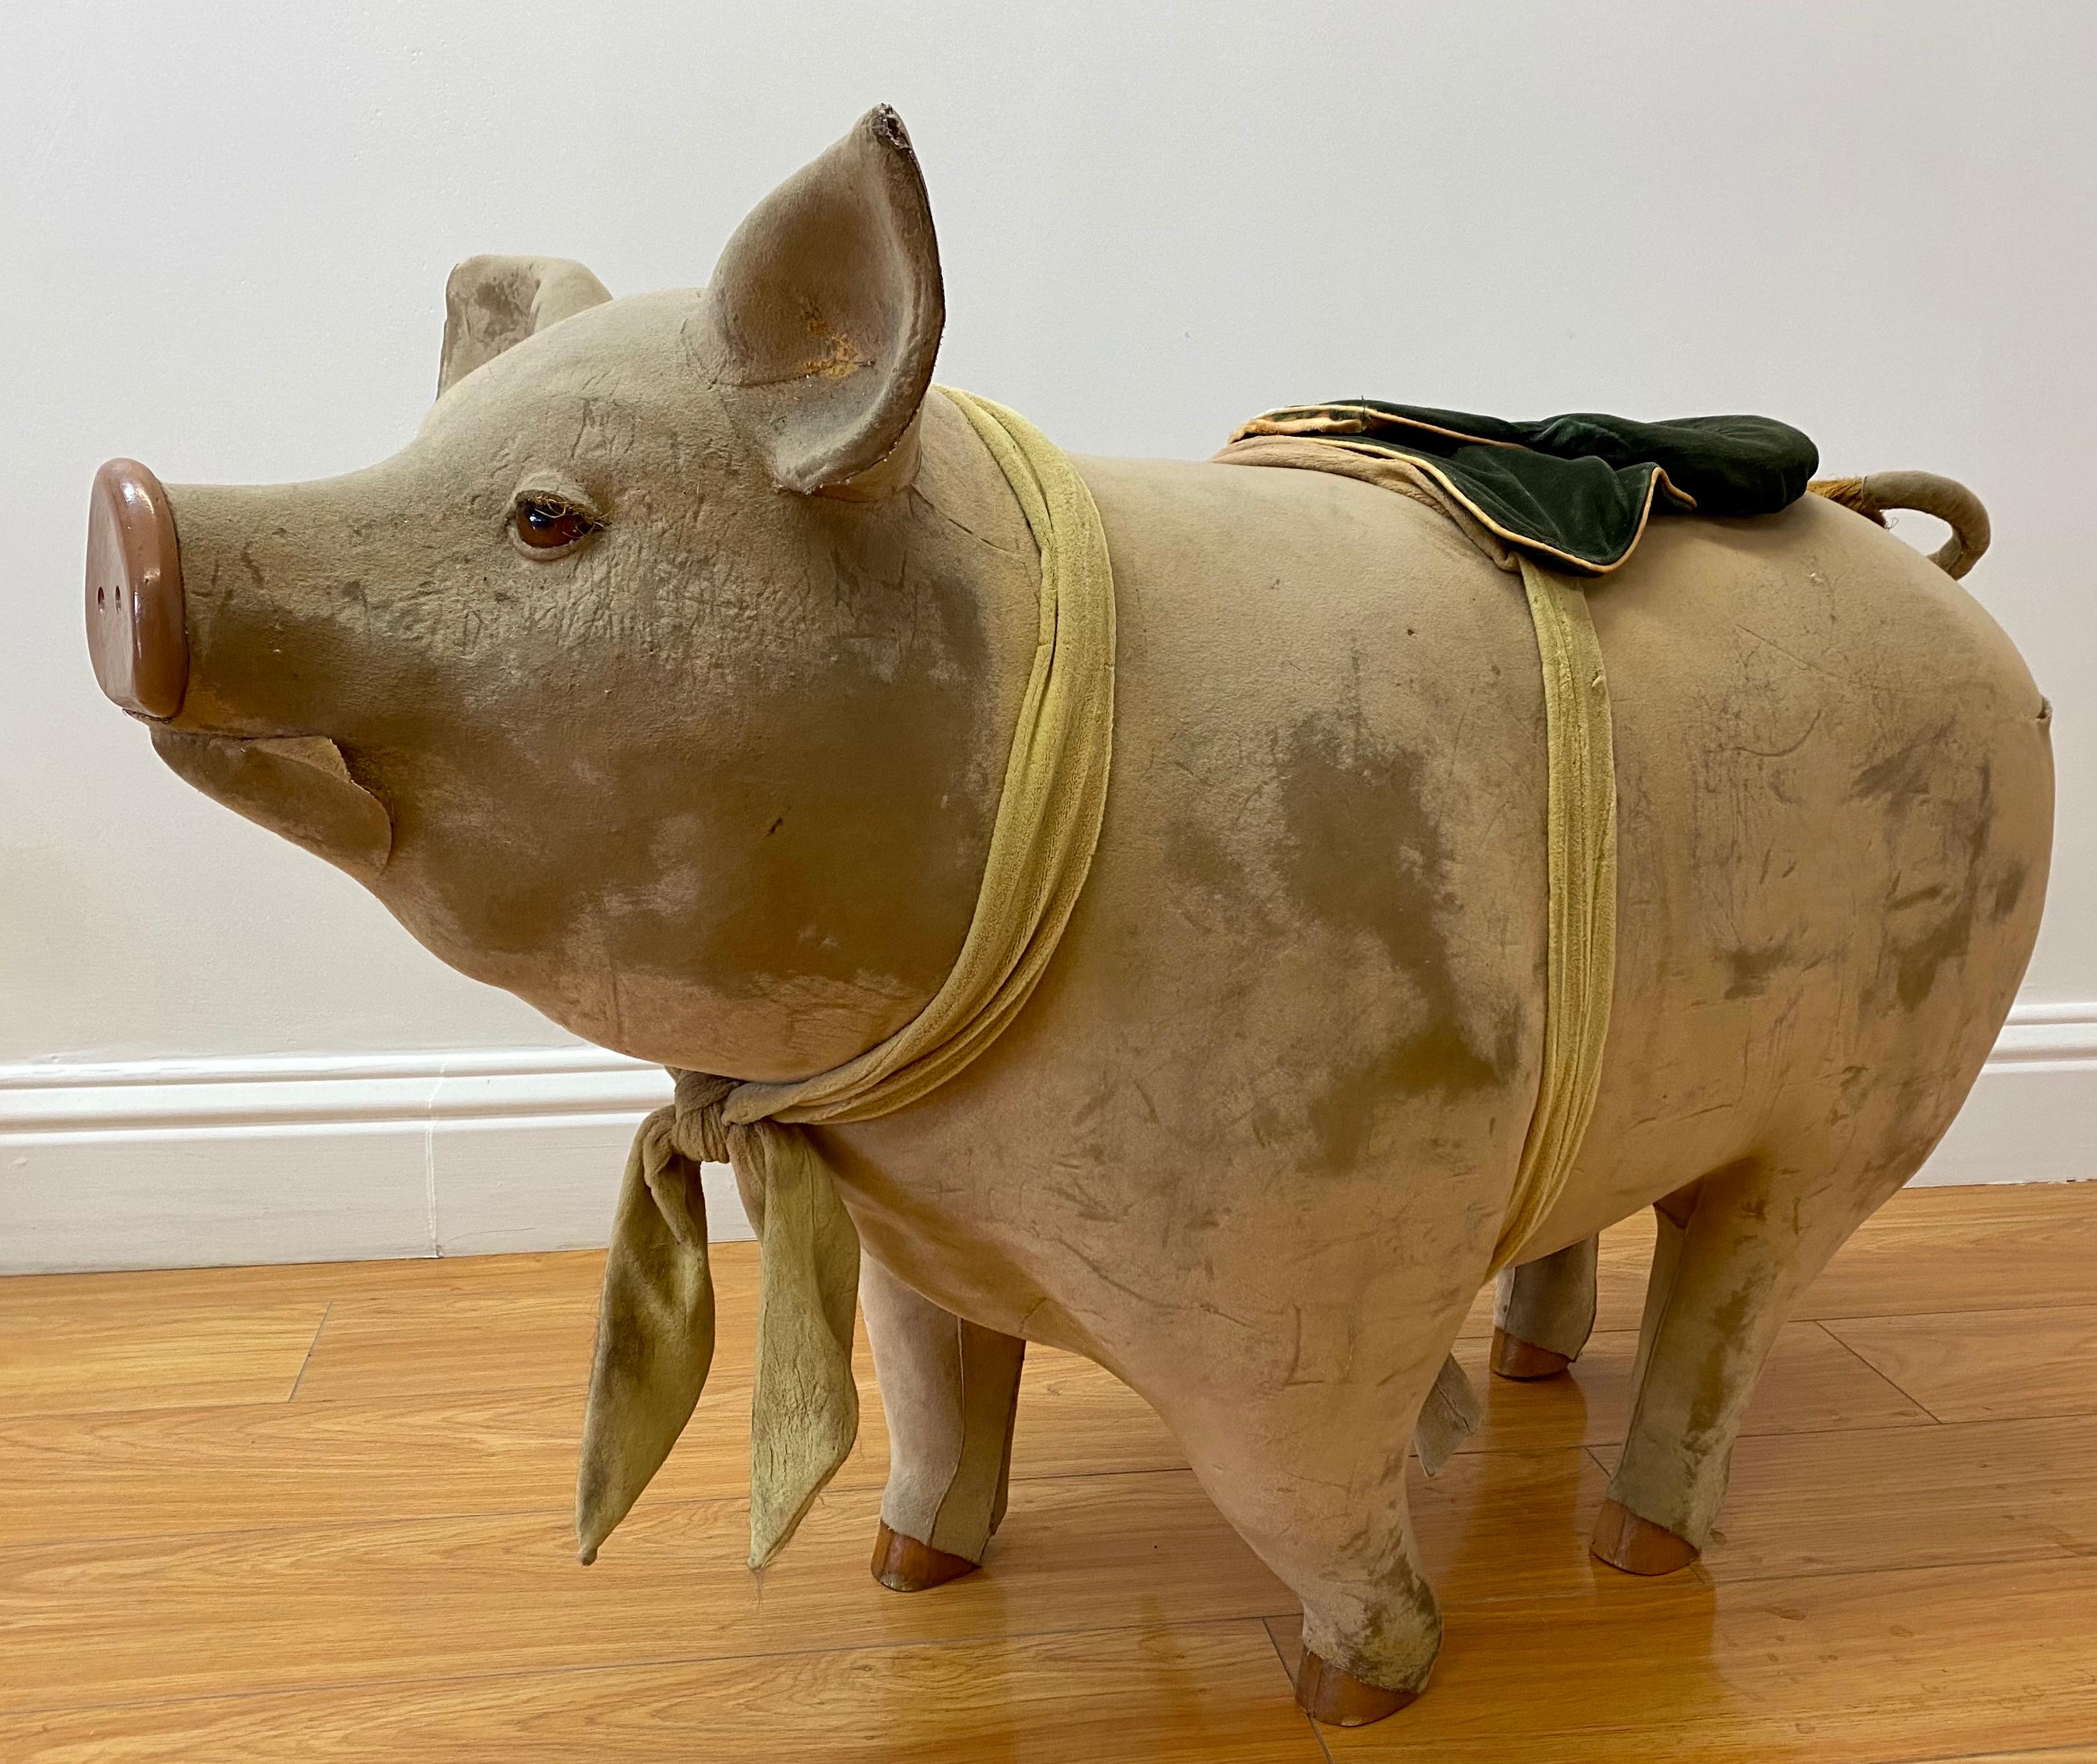 Large scale 19th century felt covered paper mache pig, circa 1890.

Possibly French

This large whimsical pig has a ton of character.

We believe the pig is made from paper cache and covered with felt, or possibly suede

The covering shows